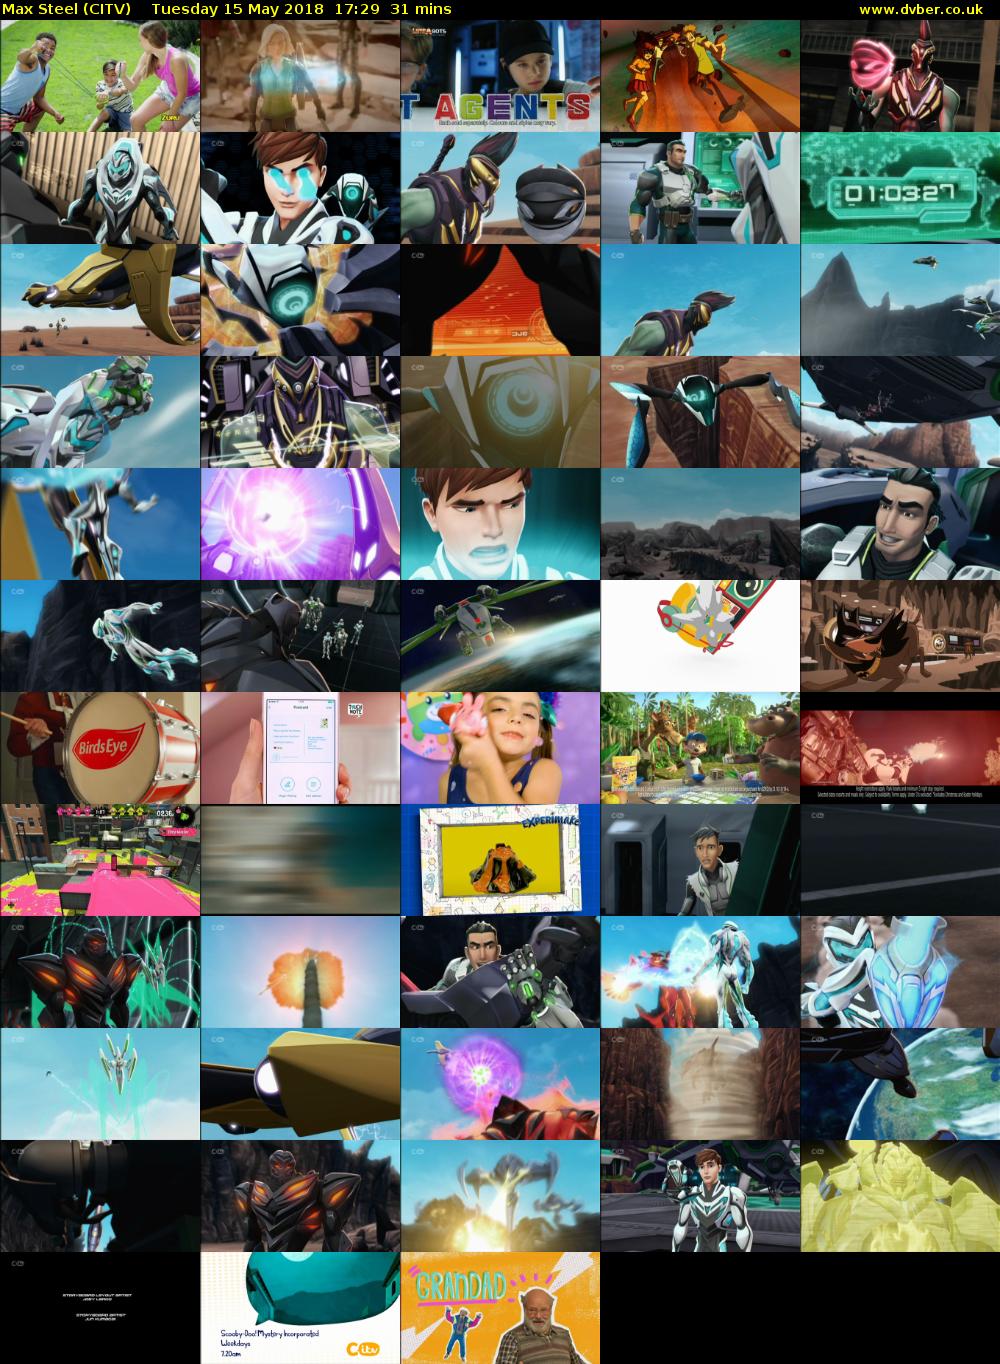 Max Steel (CITV) Tuesday 15 May 2018 17:29 - 18:00